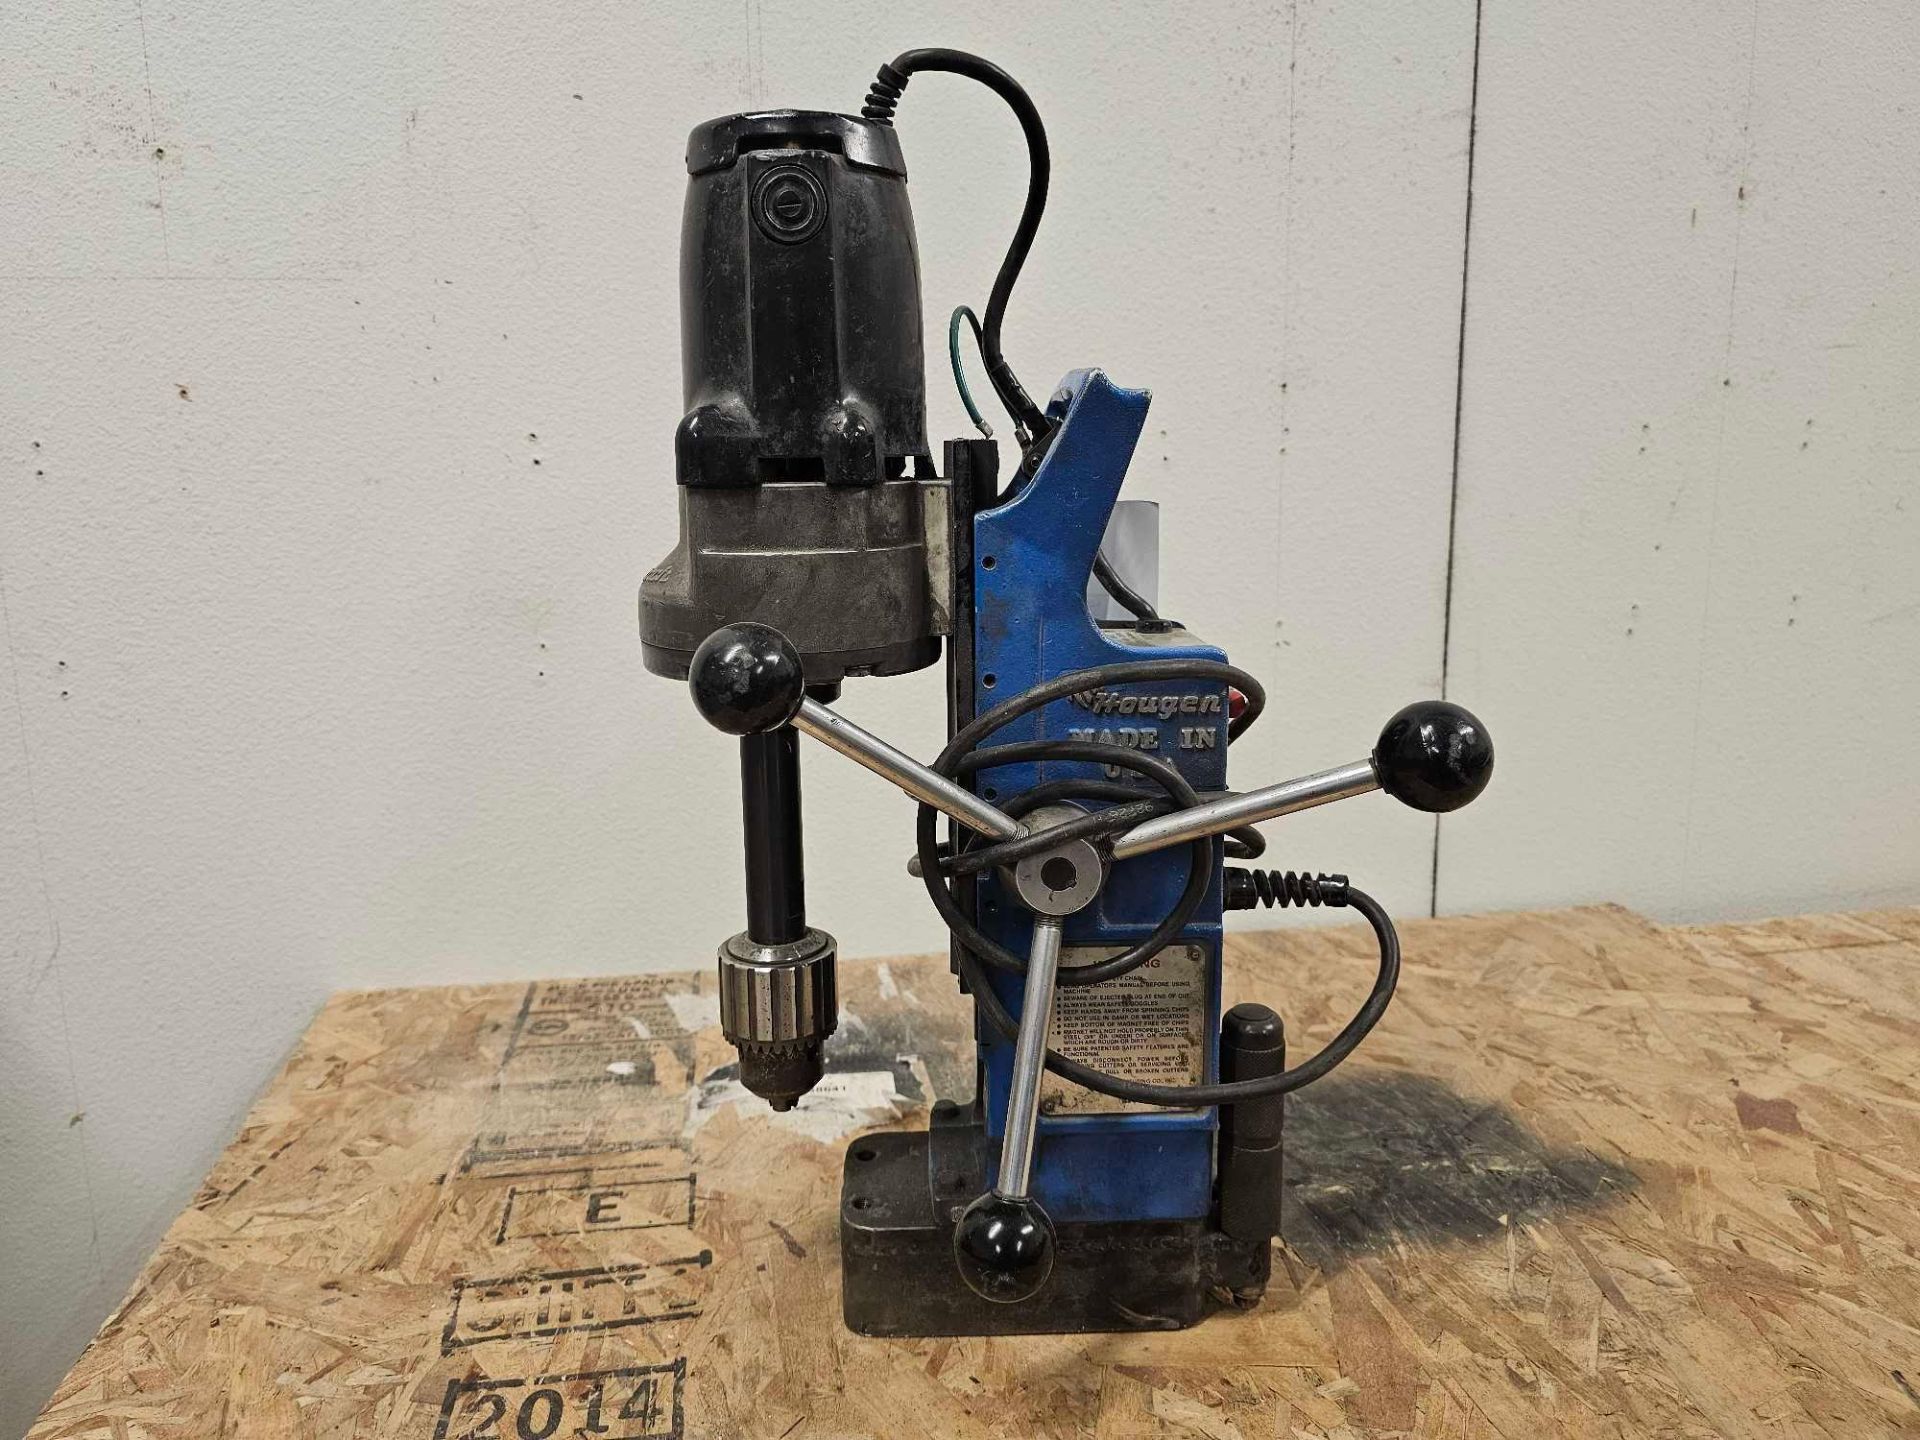 HOUGEN MAG DRILL, MAGNETIC DRILL PRESS - Image 5 of 6